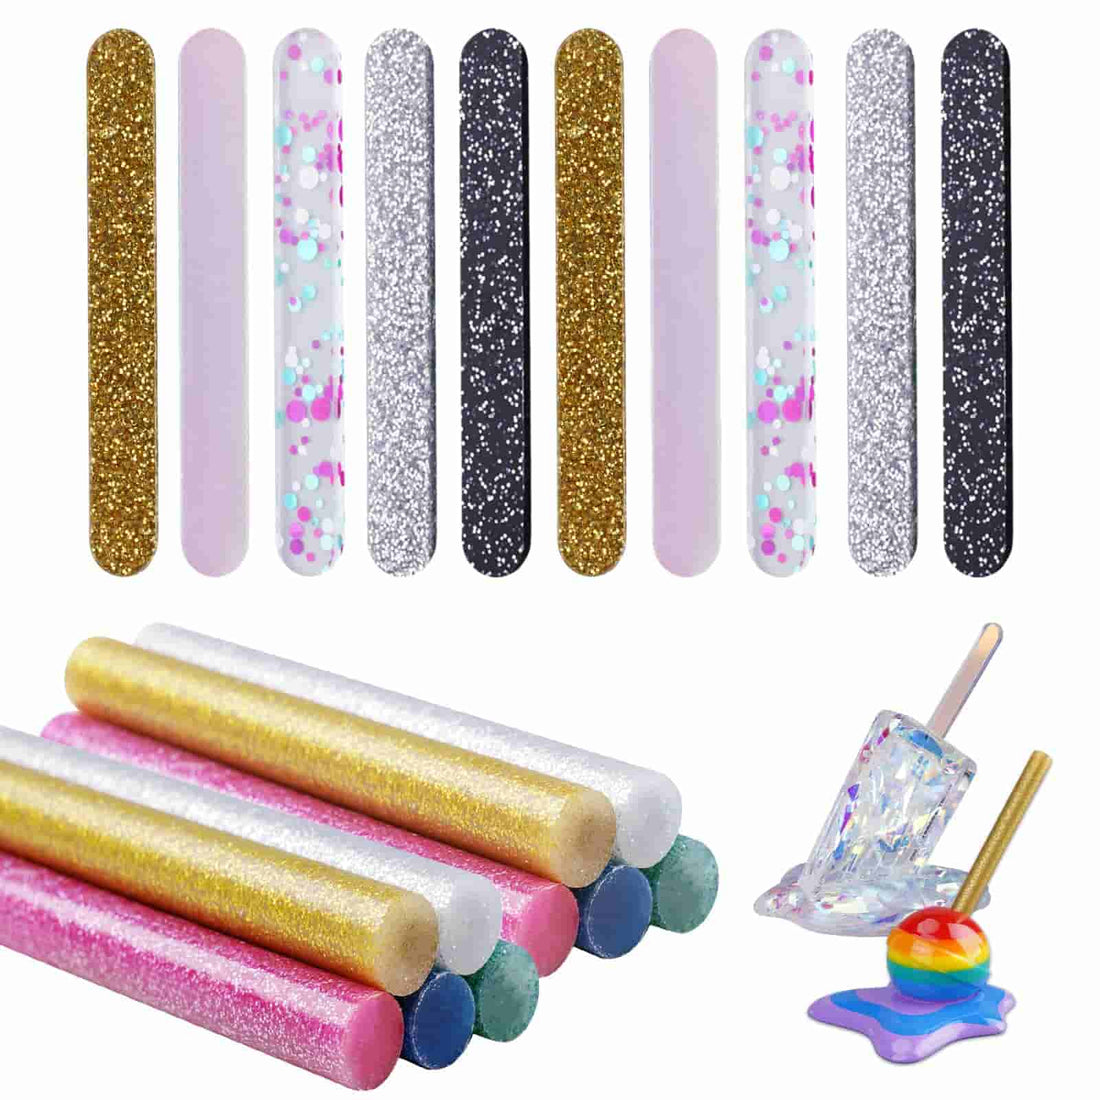 Melted Ice Pop, Candy Shape Resin Molds – Let's Resin